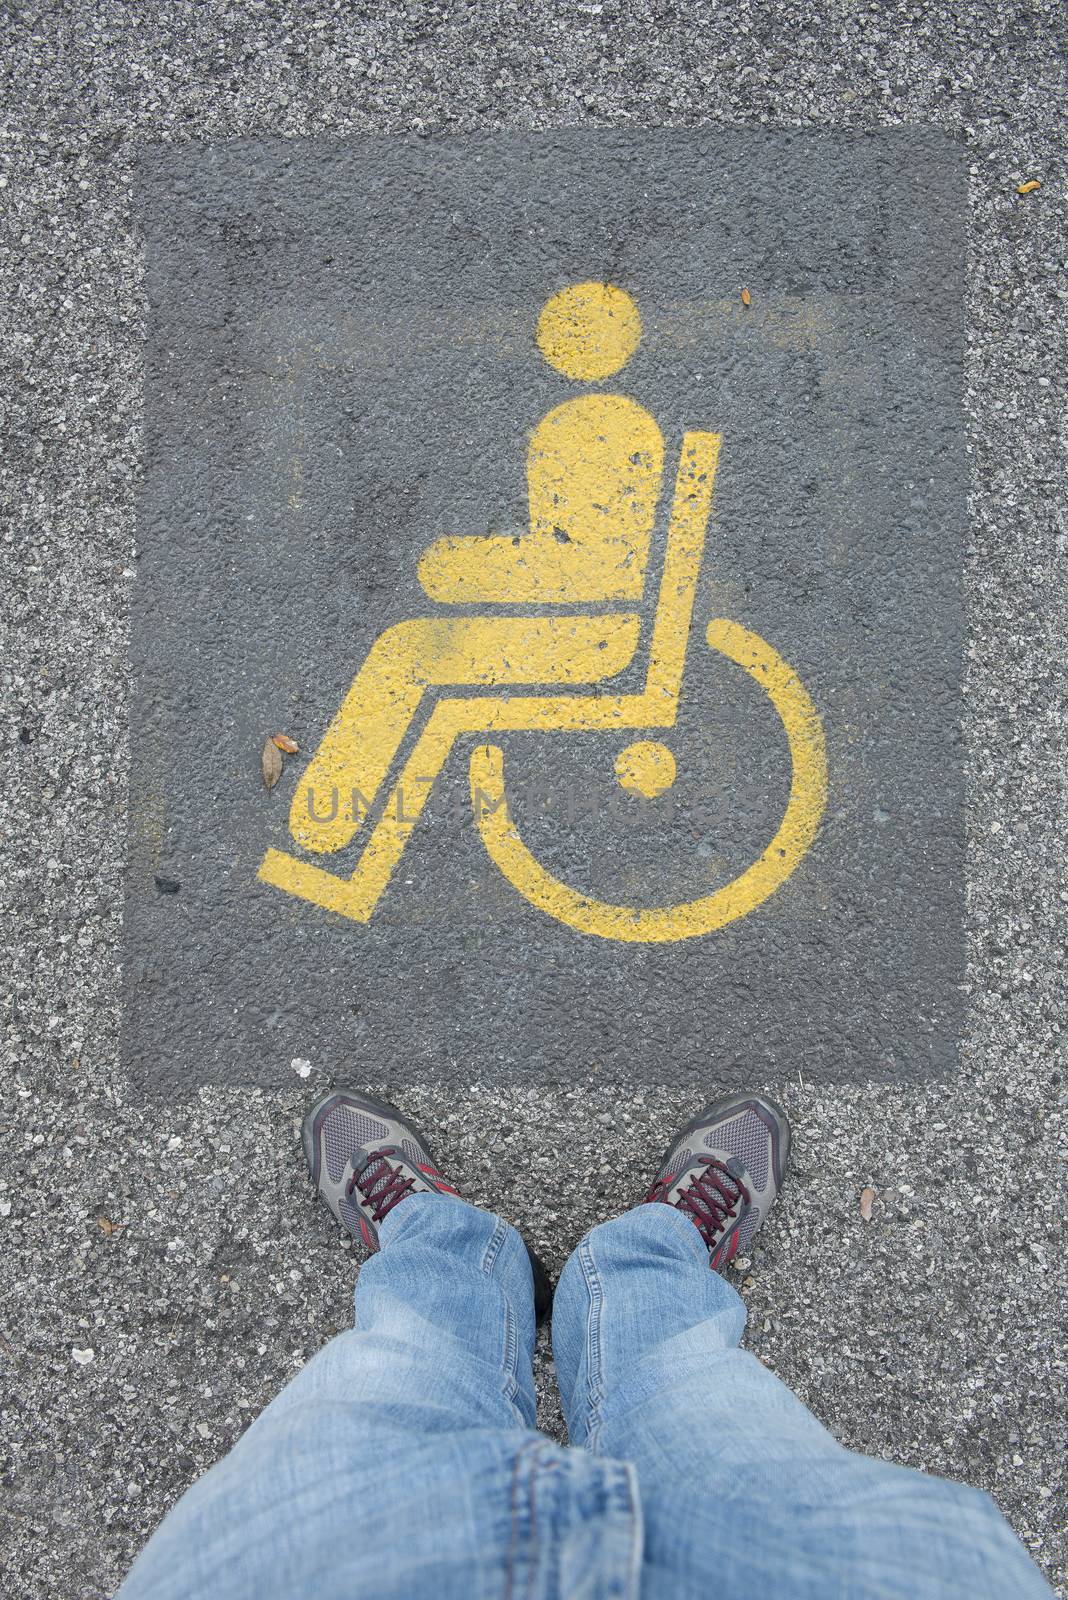 Parking for disables by sergiodv